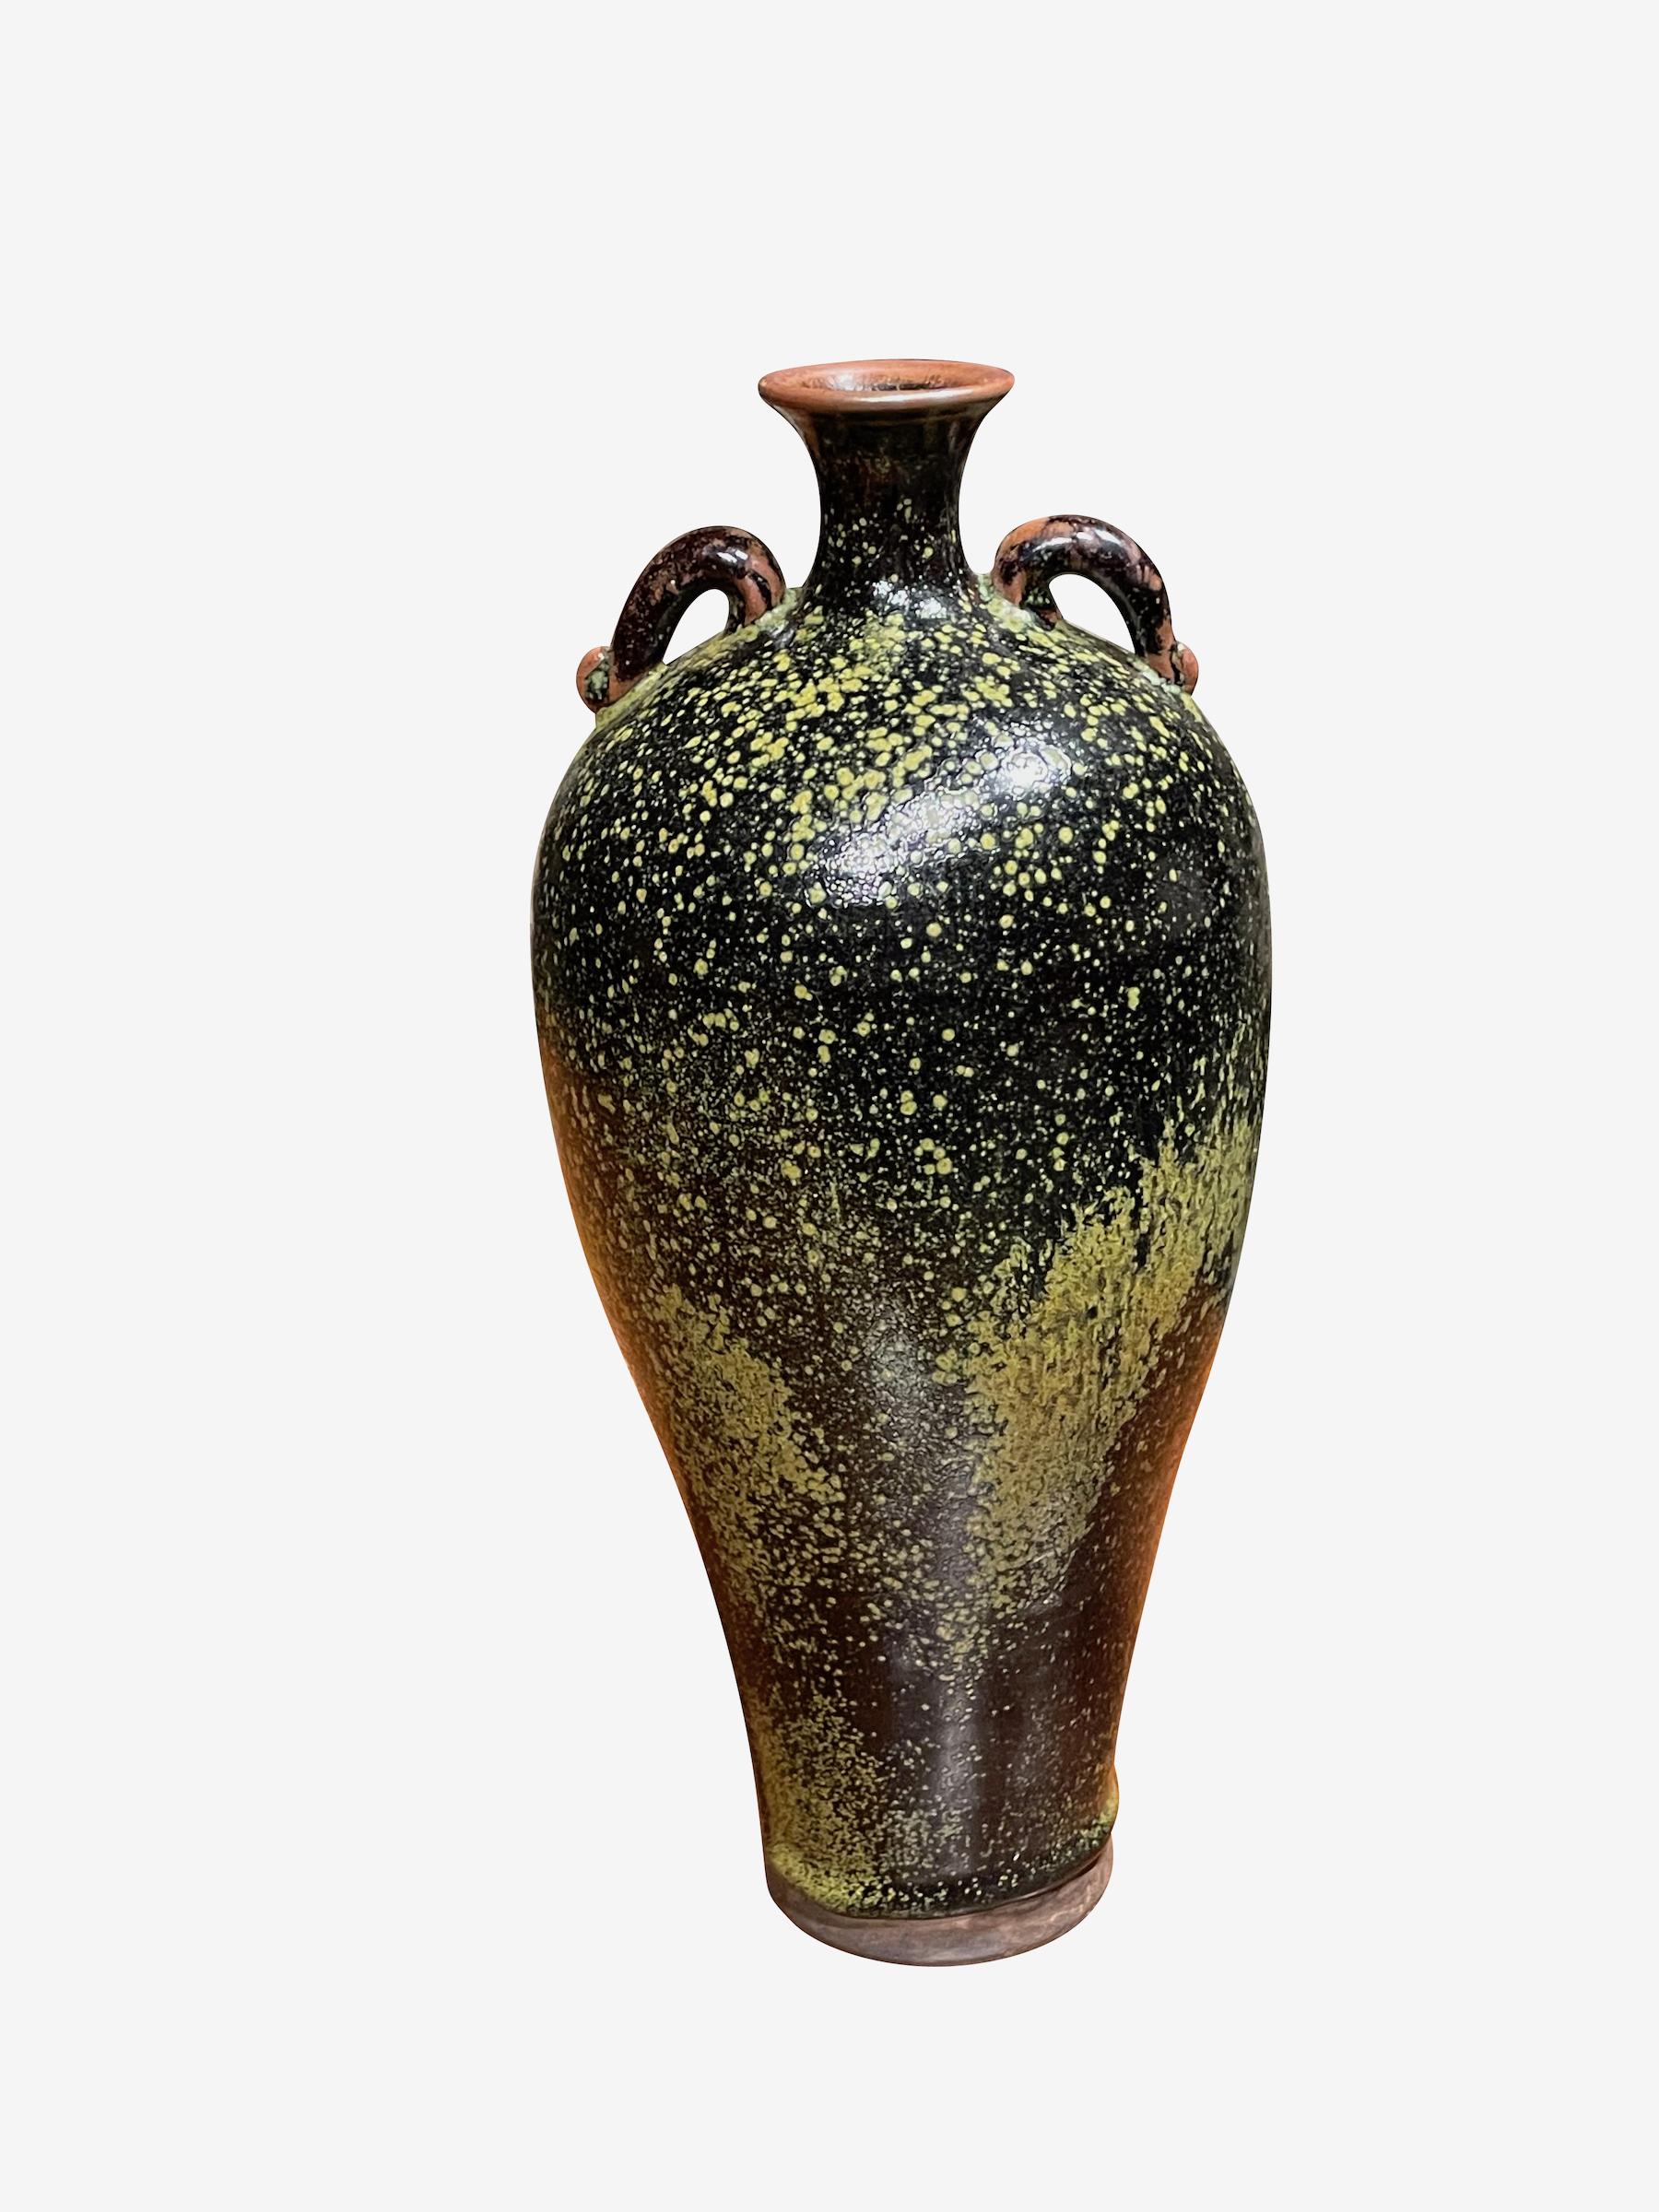 Contemporary Chinese speckled black and green tulip shaped vase 
Two small handles at opening
One of three from a collection that sit well together. ( S6413 / S6414 ).